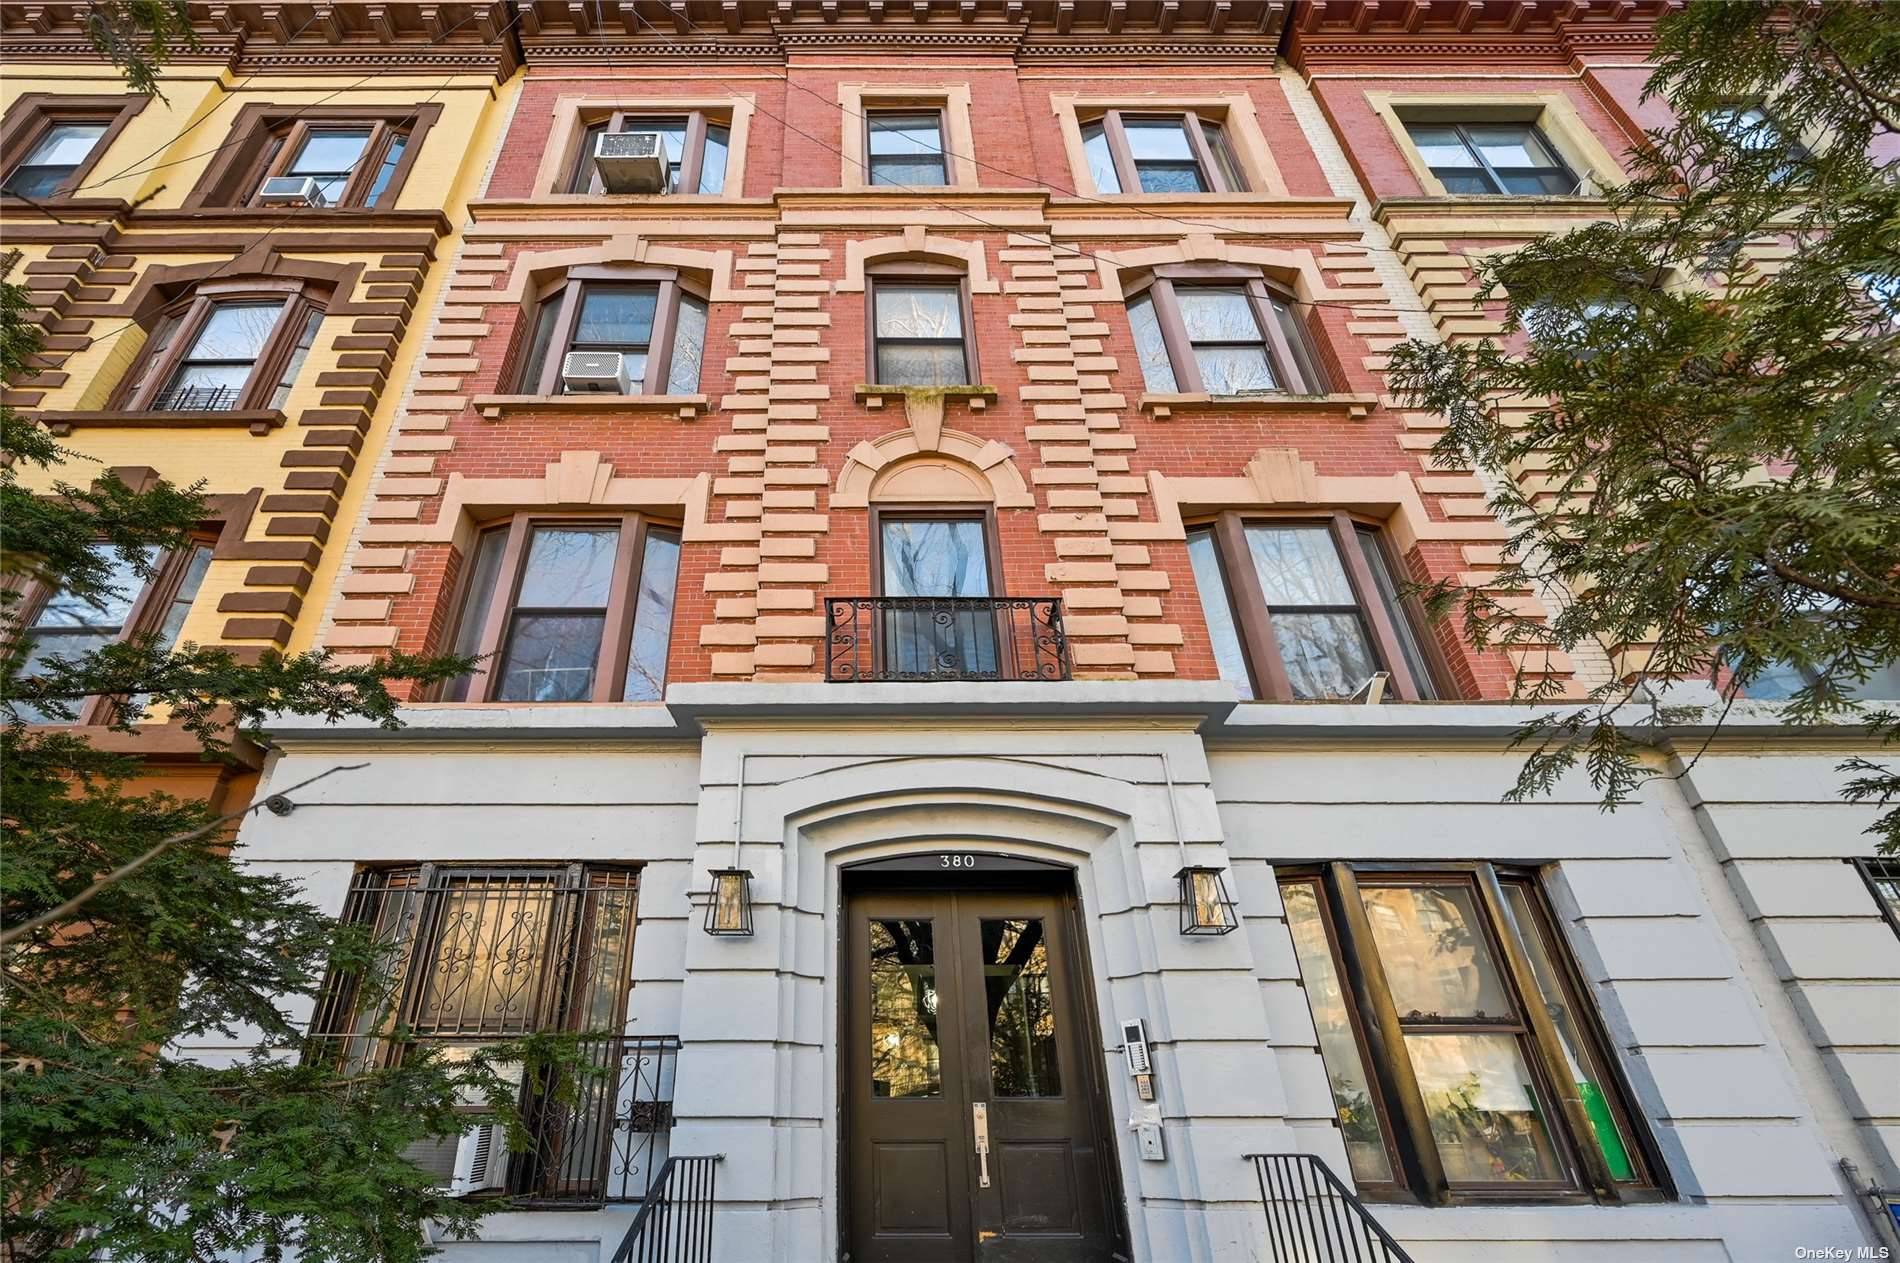 Inches away from Prospect Park, and Grand Army Plaza, stands the Quintessential Brooklyn Multi Family Townhouse.